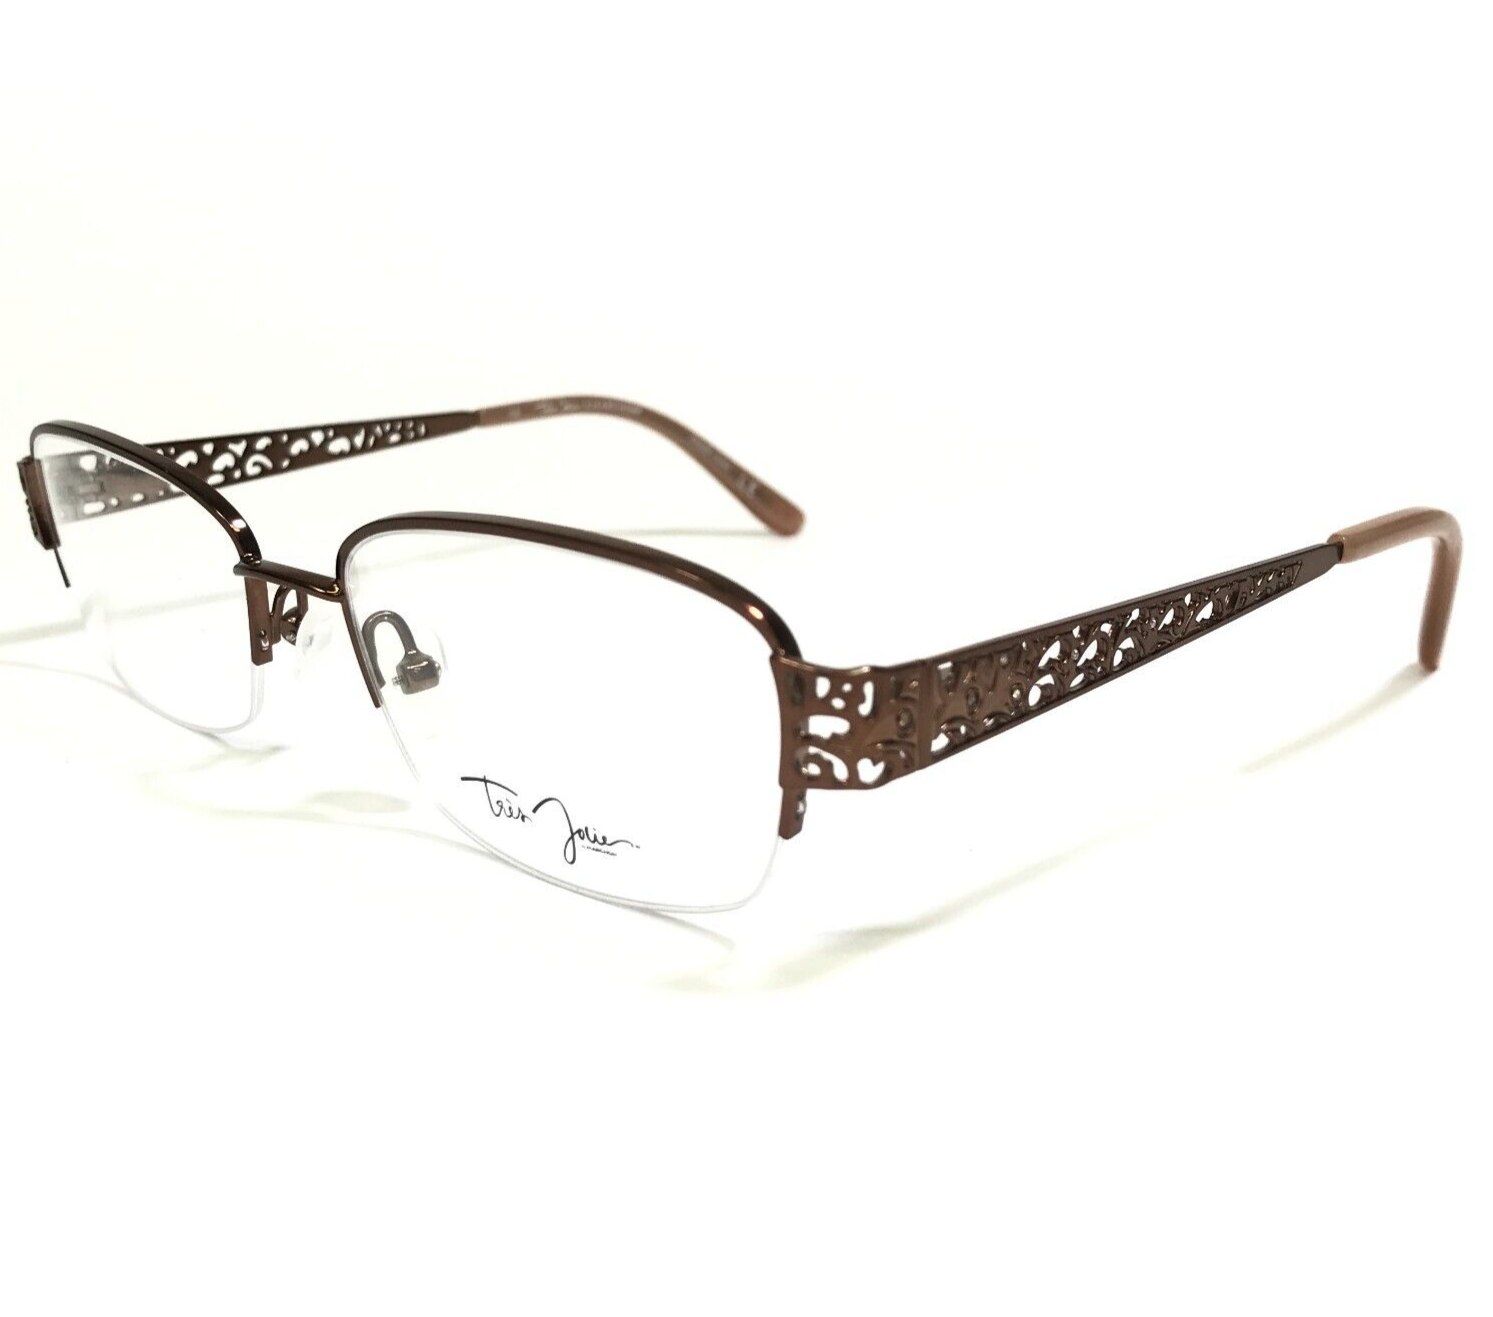 Primary image for Tres Jolie by Marchon Eyeglasses Frames 160 210 Brown Rectangular 52-17-135